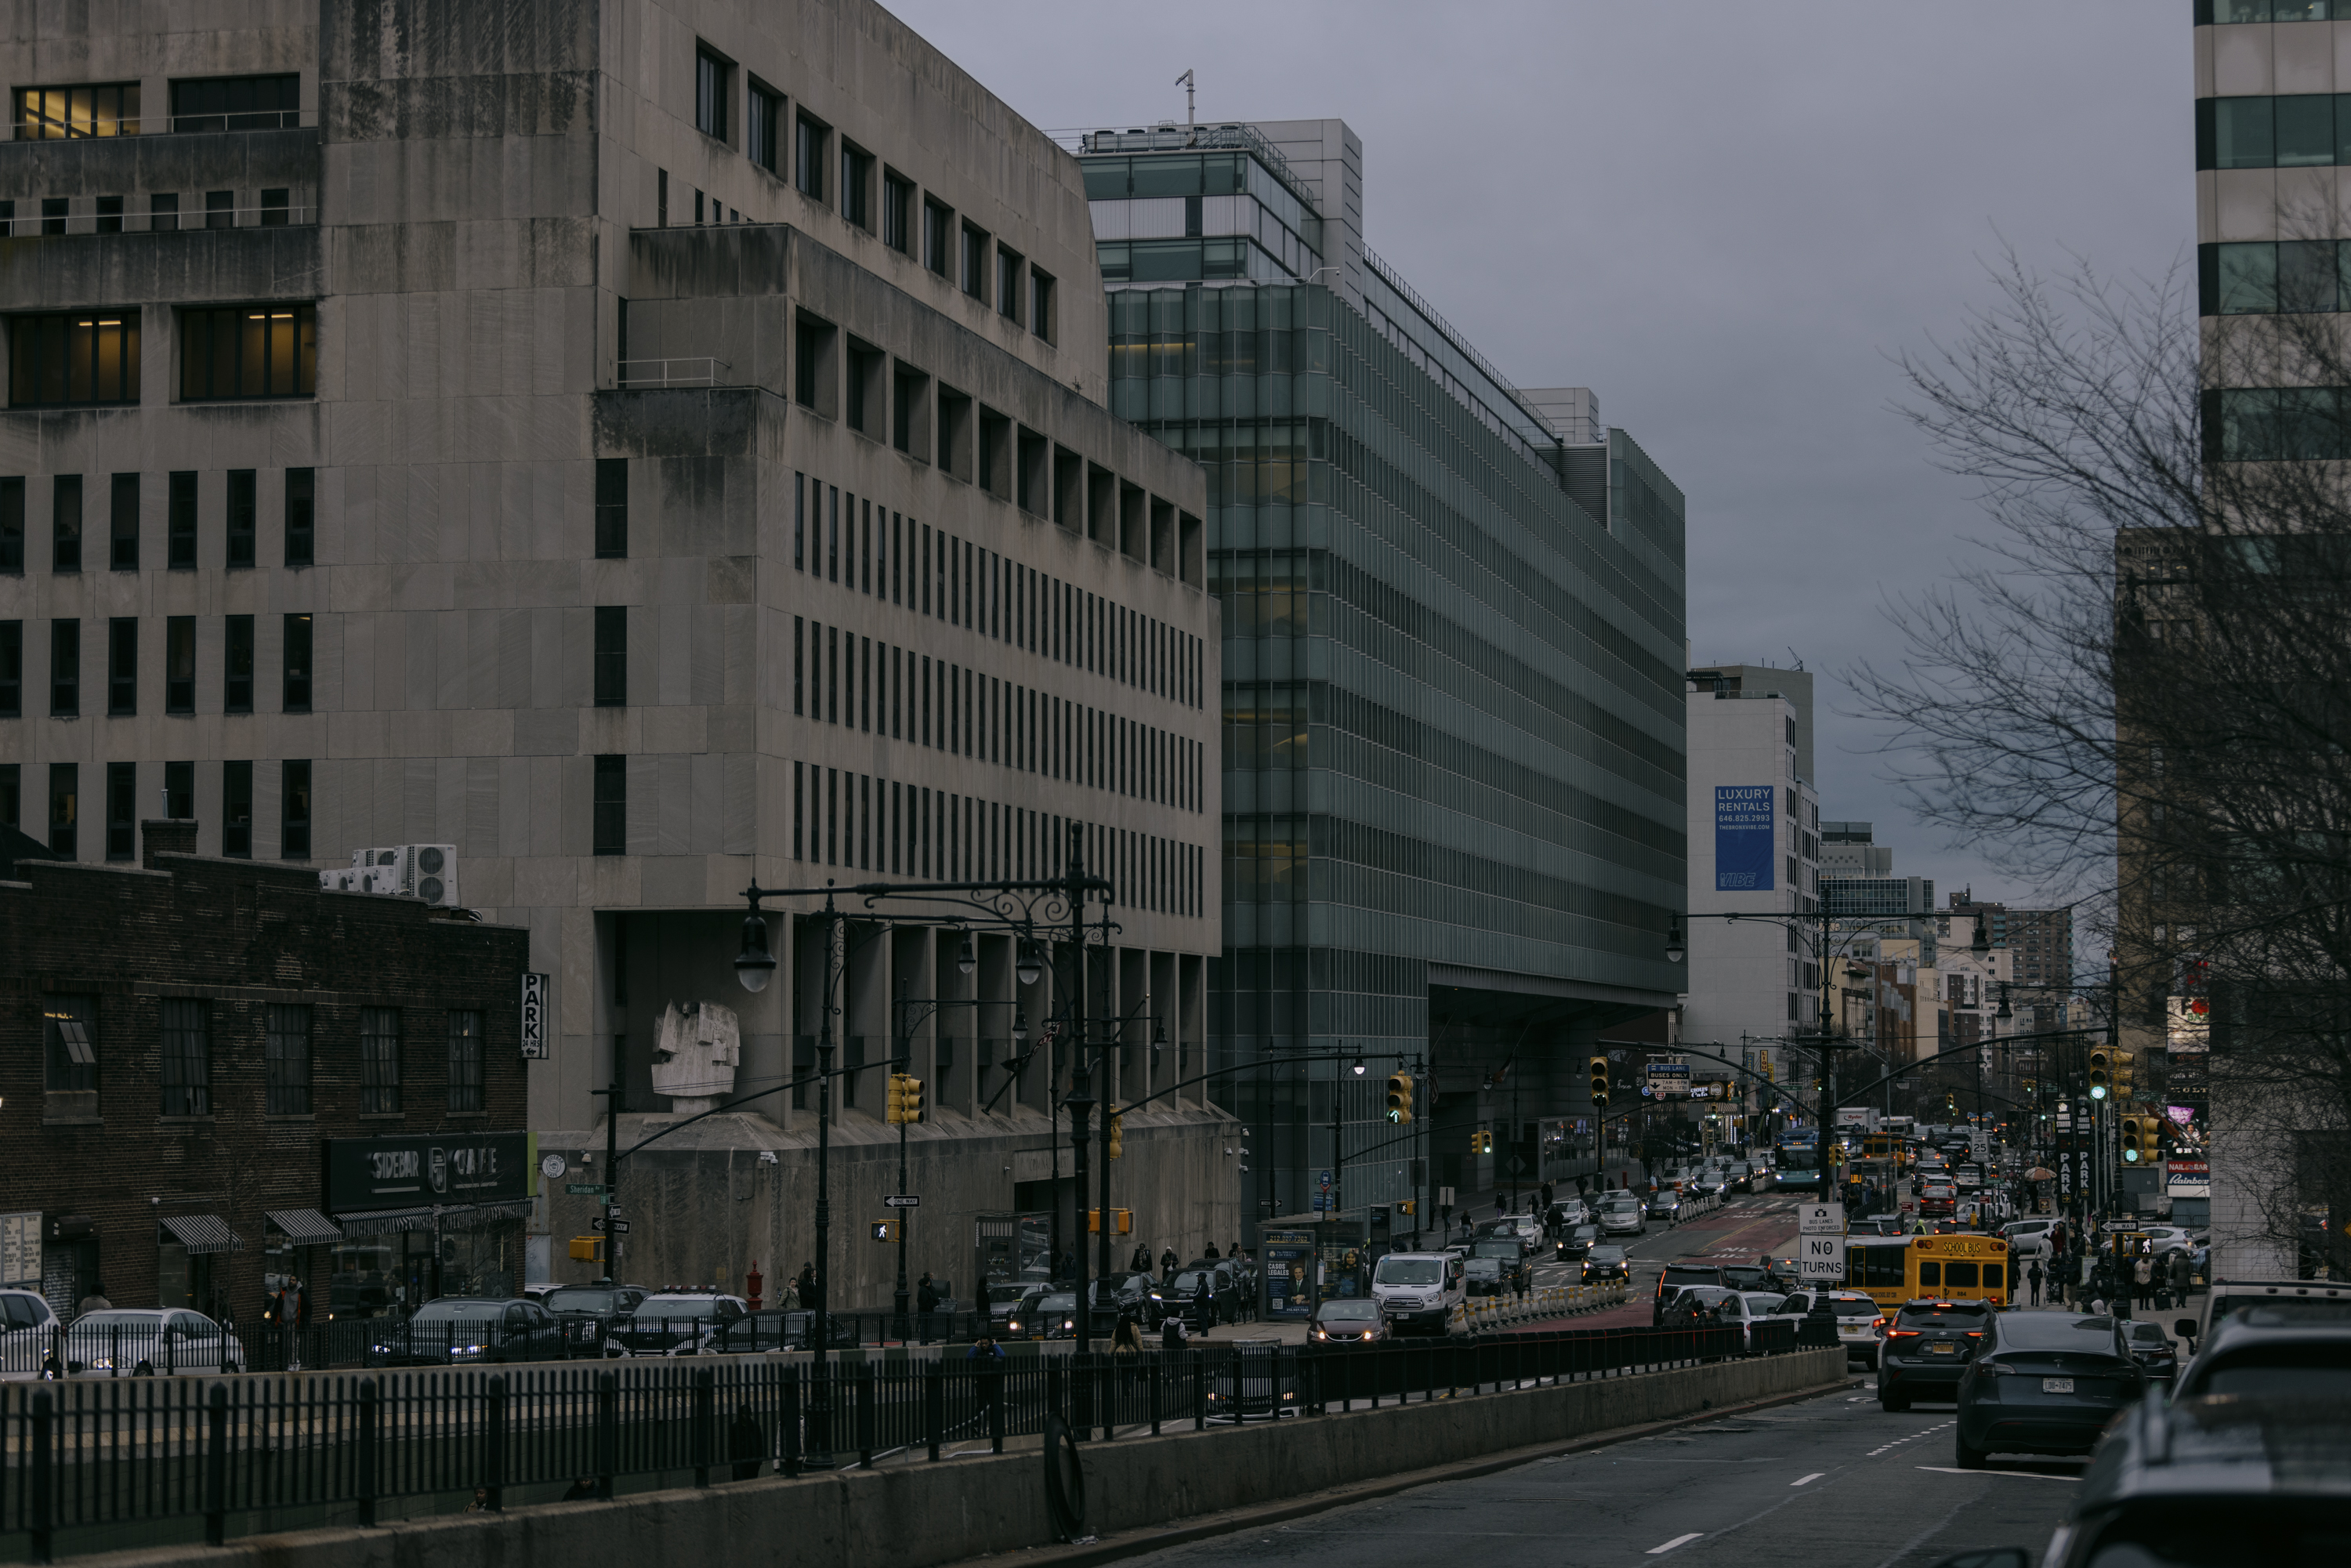 View of a Bronx street, showing cars and the Bronx County Hall Of Justice in the background.